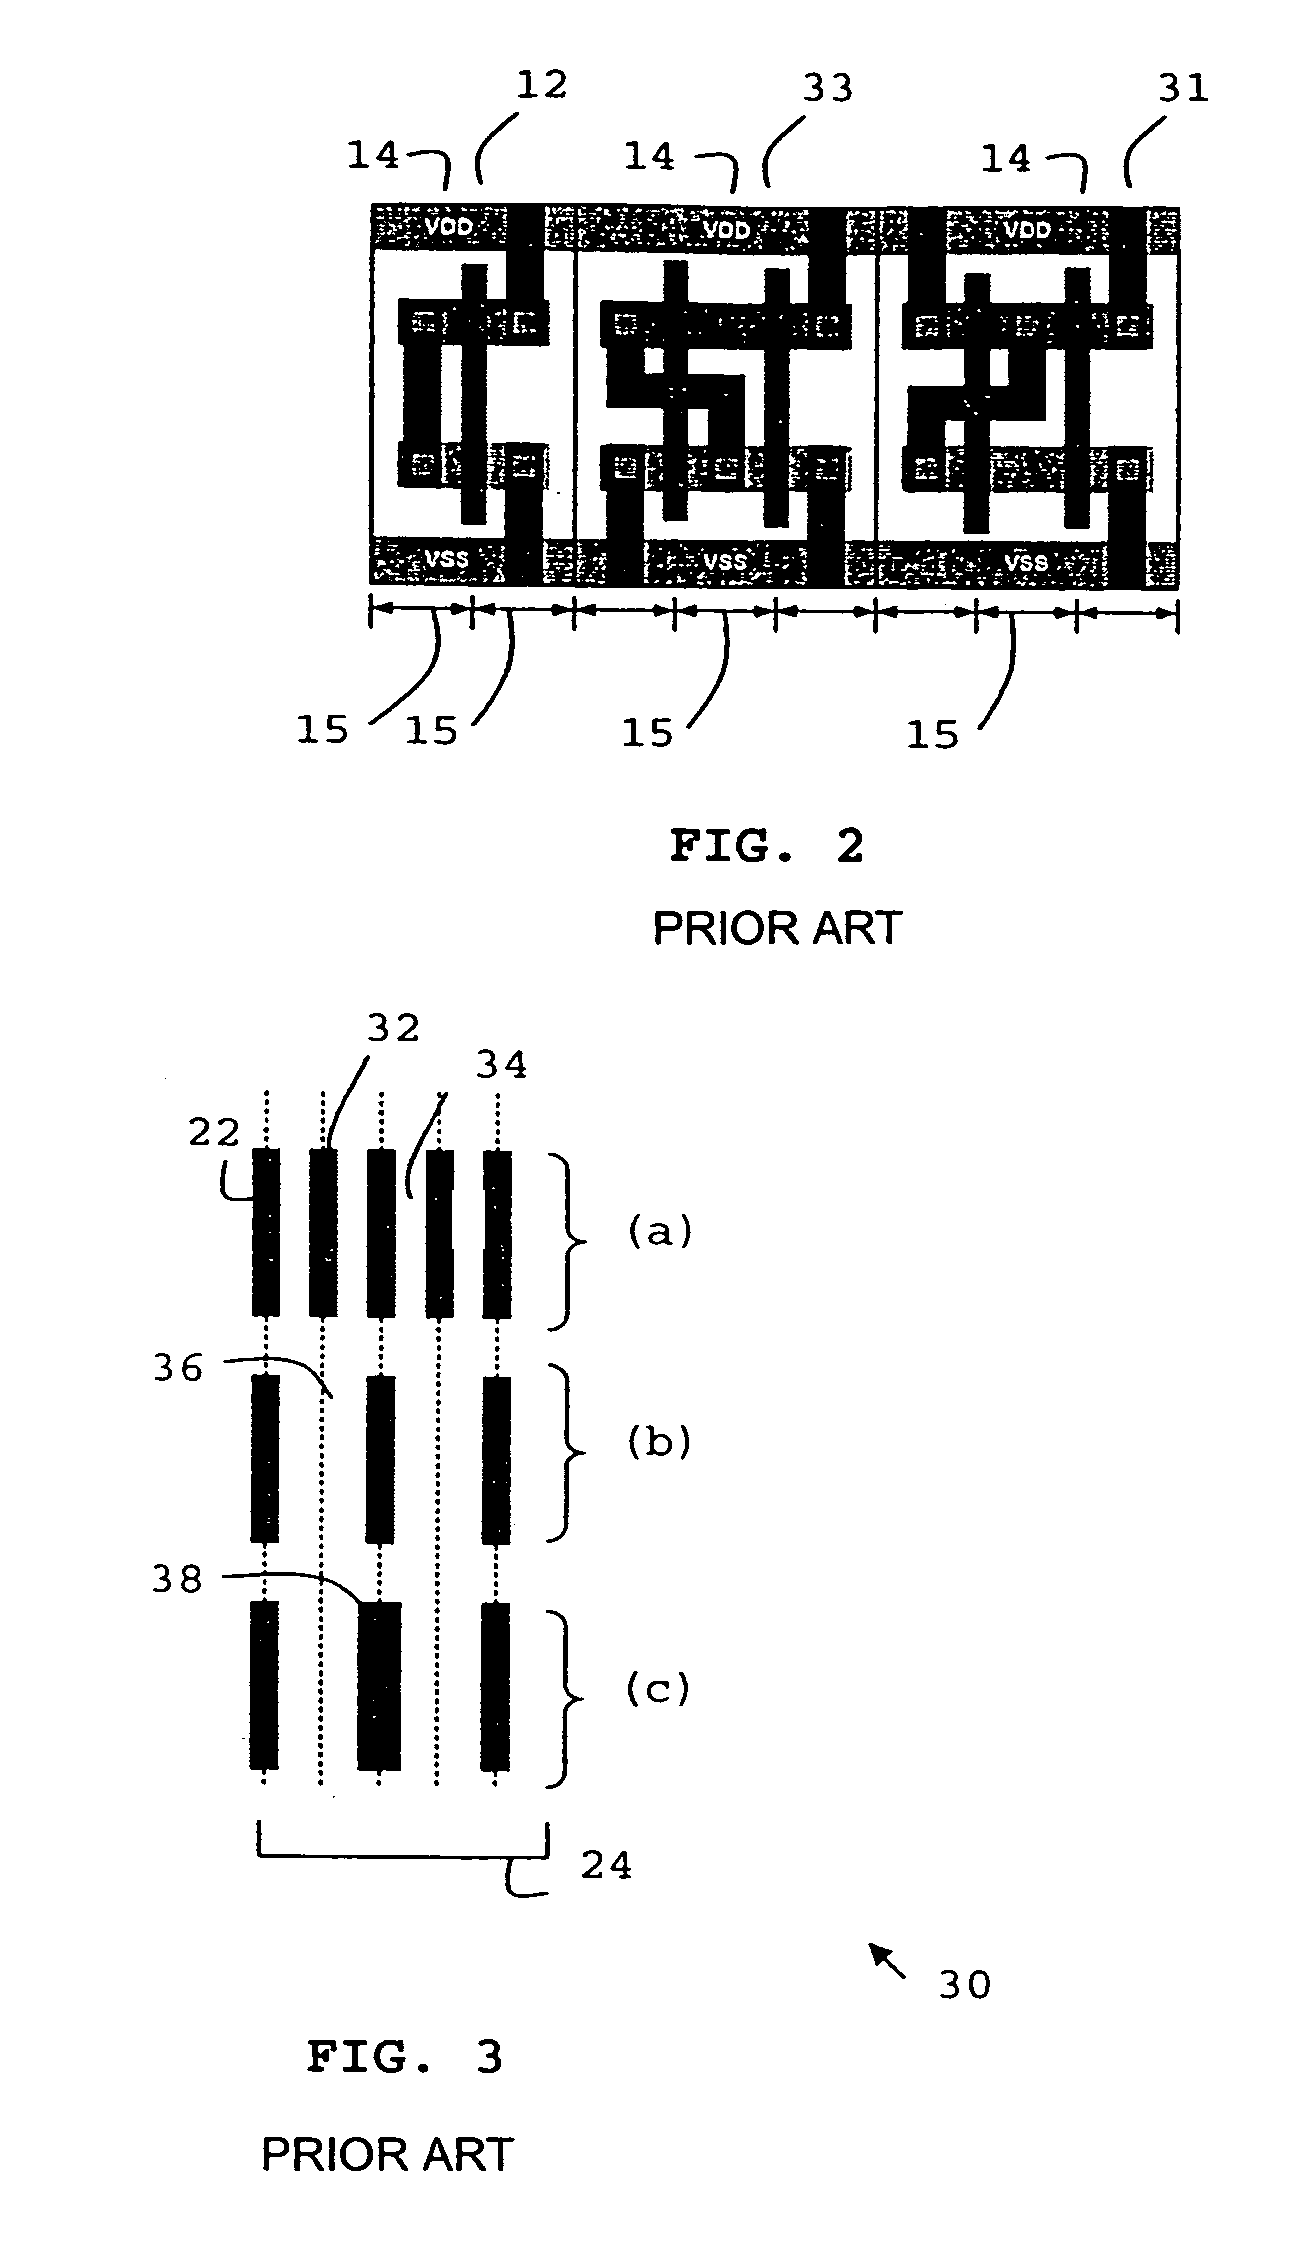 Aligned logic cell grid and interconnect routing architecture